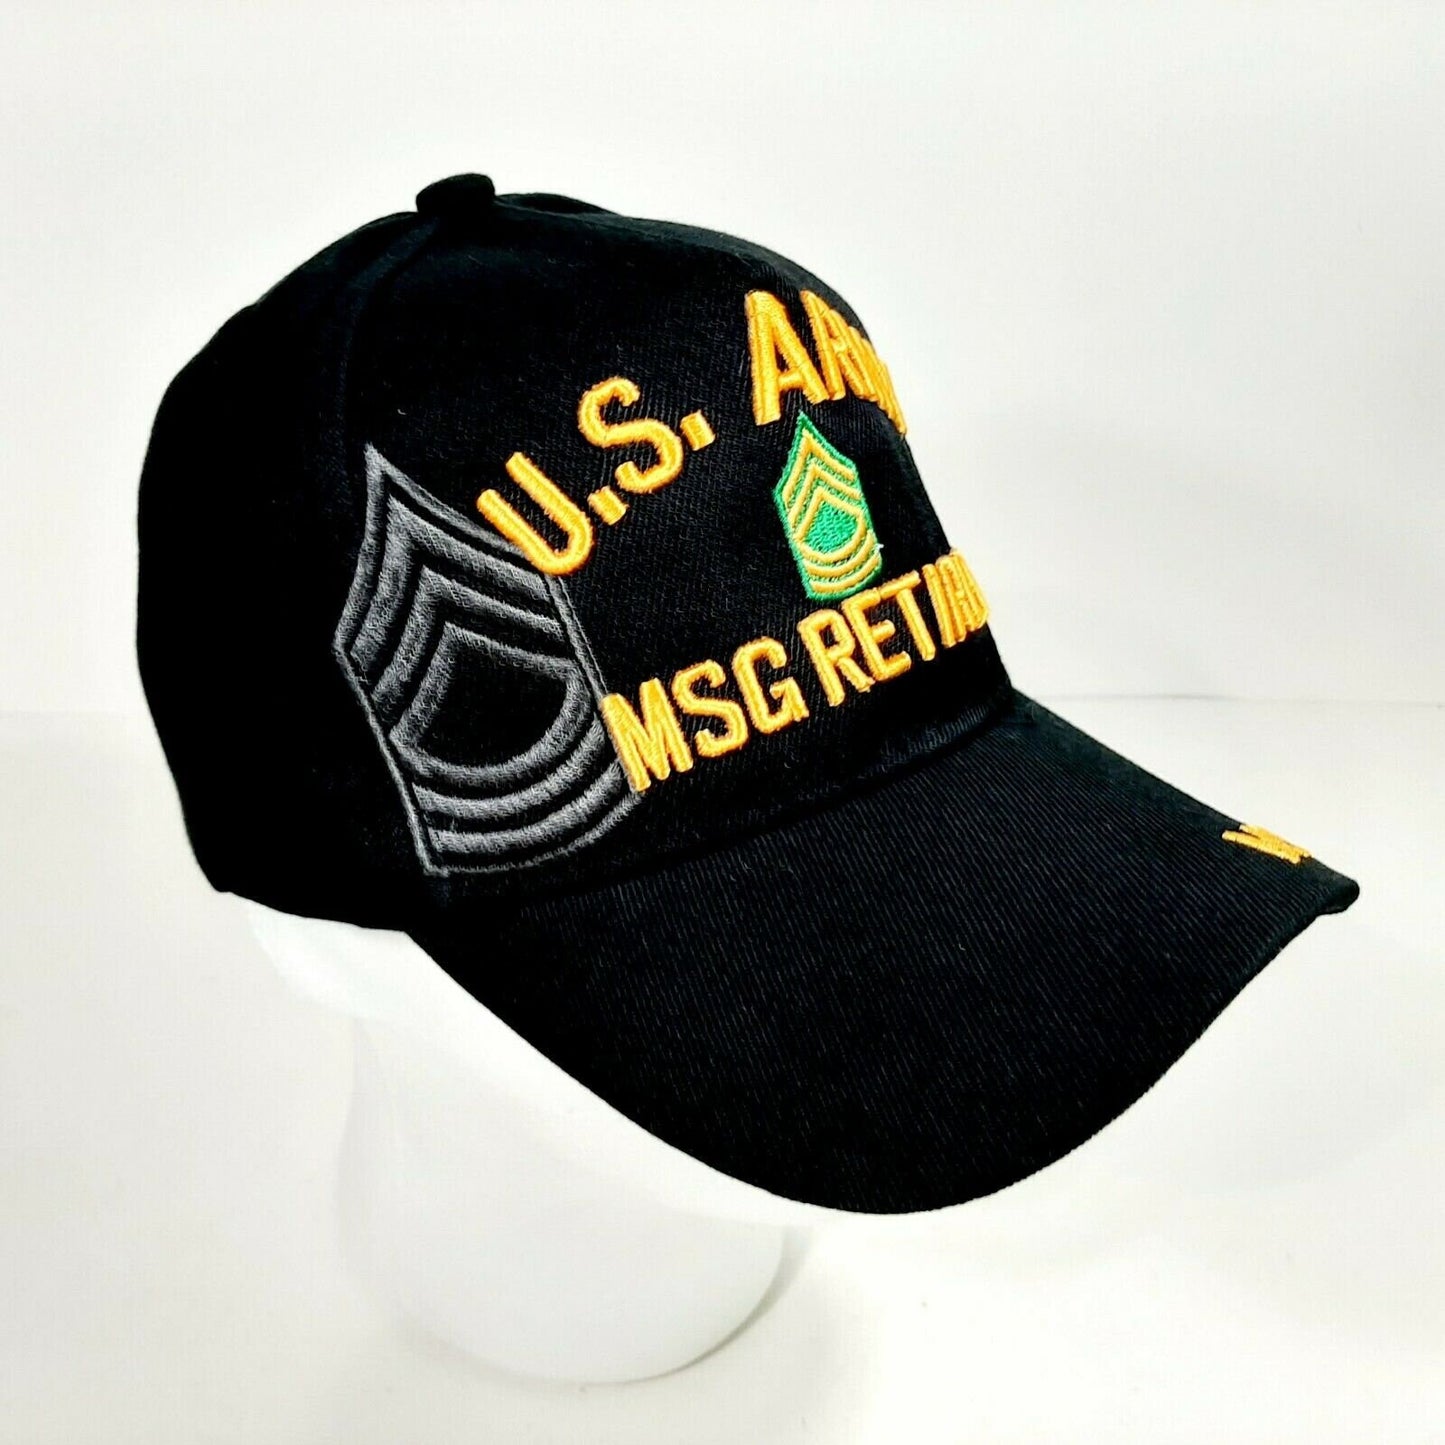 US Army MSG Retired Men's Ball Cap Hat Black Embroidered Acrylic